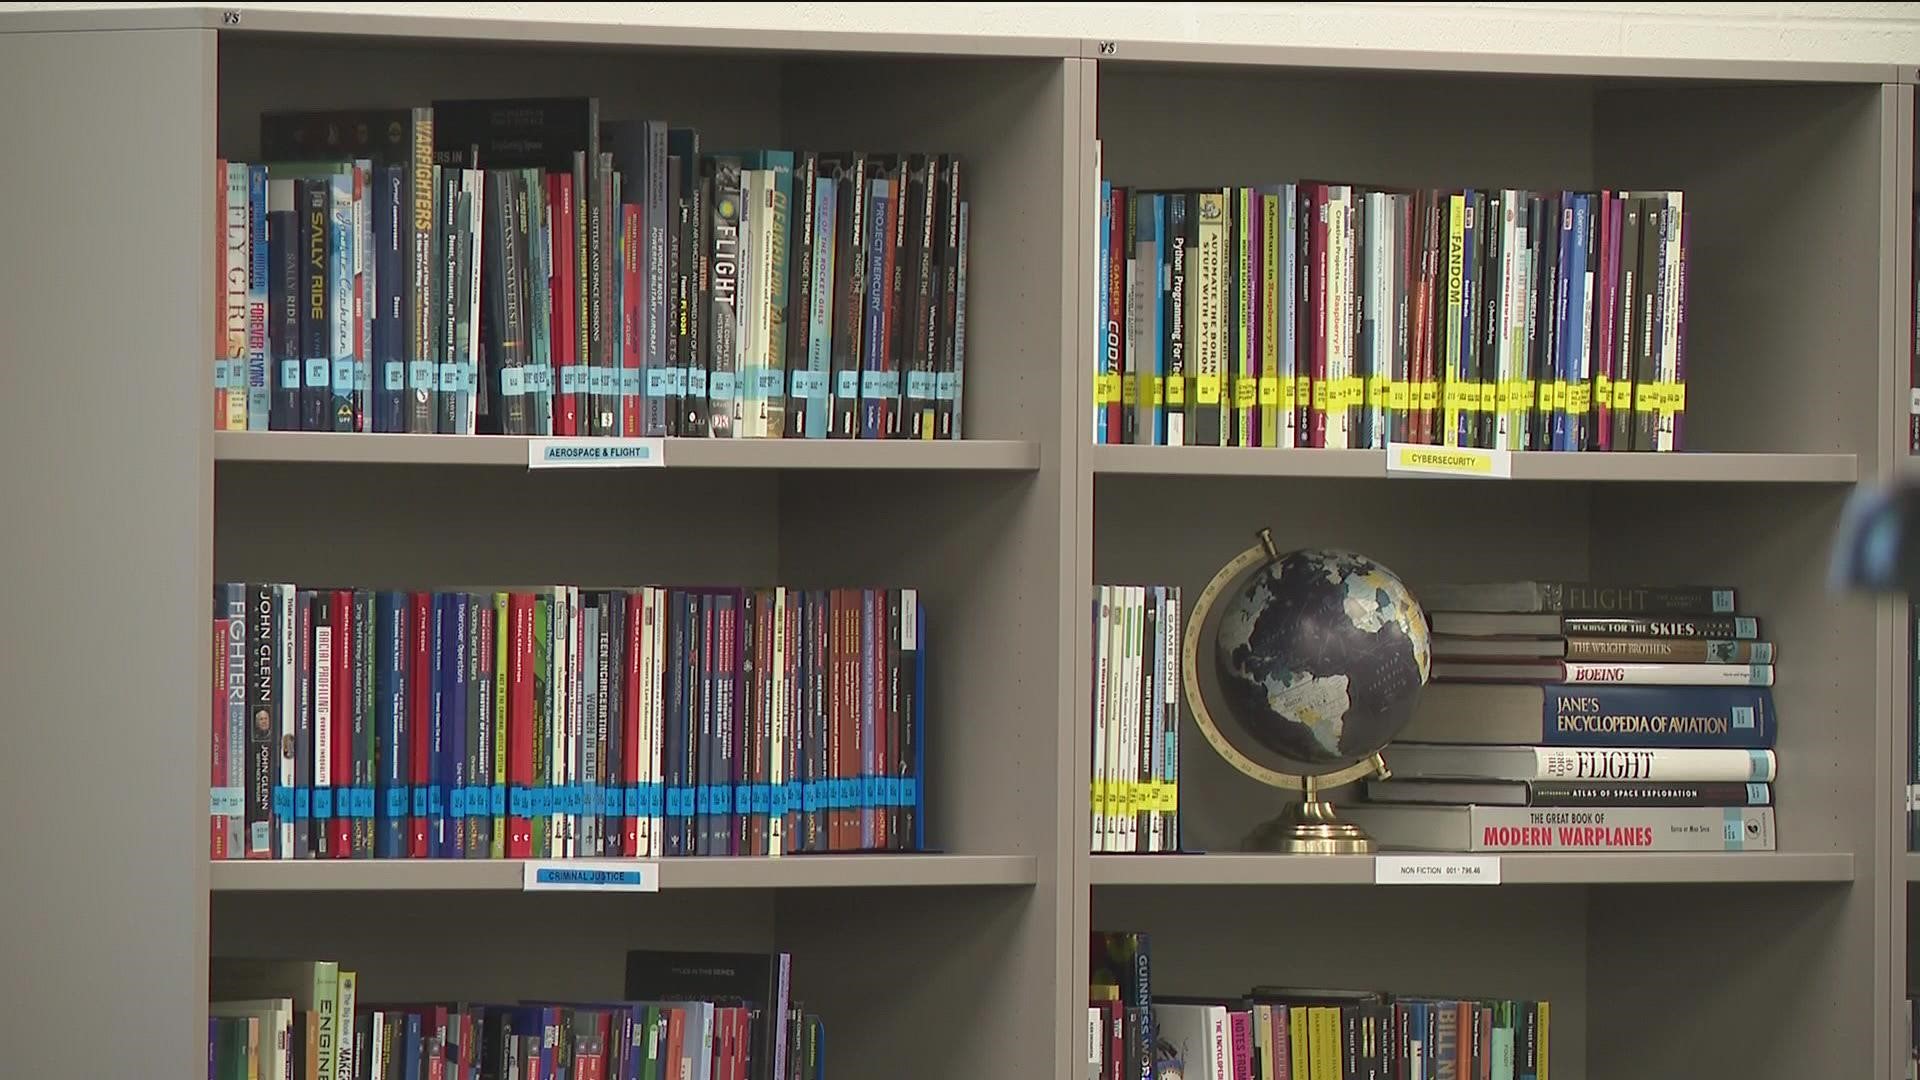 Forsyth County Schools claim the books contain too much "sexually explicit content."